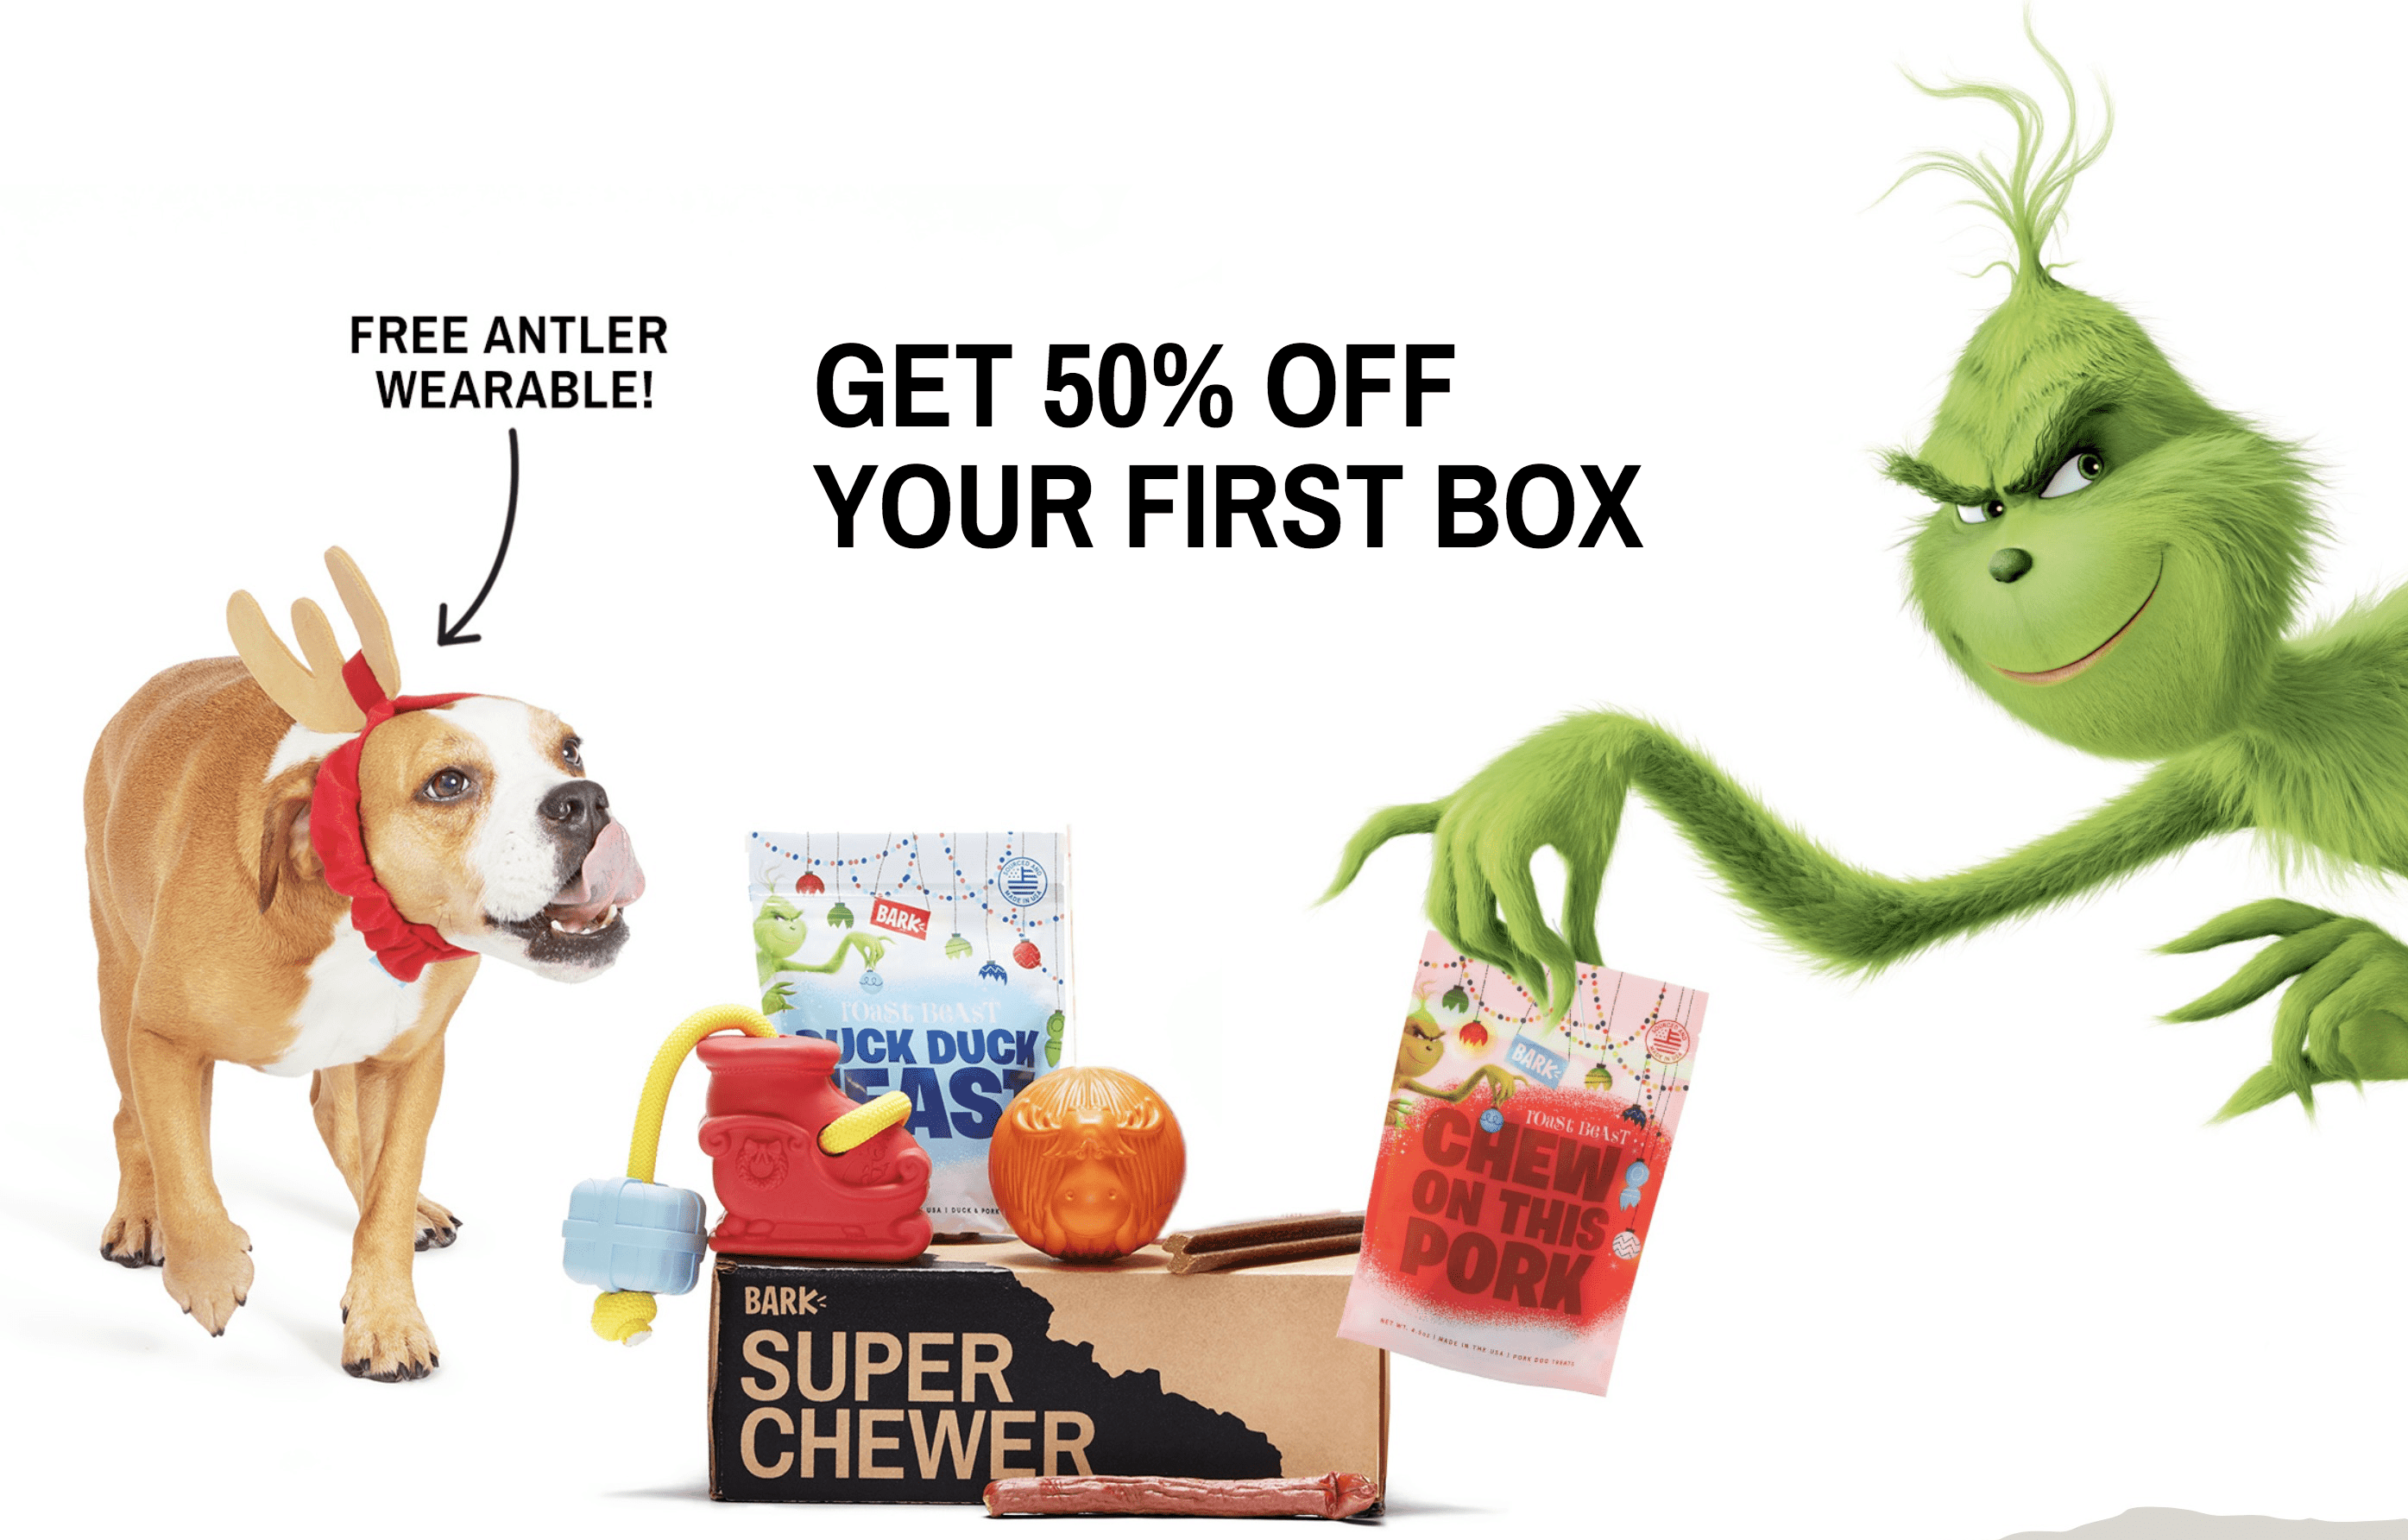 BarkBox Super Chewer Coupon Get 50 Off Your First Month! hello